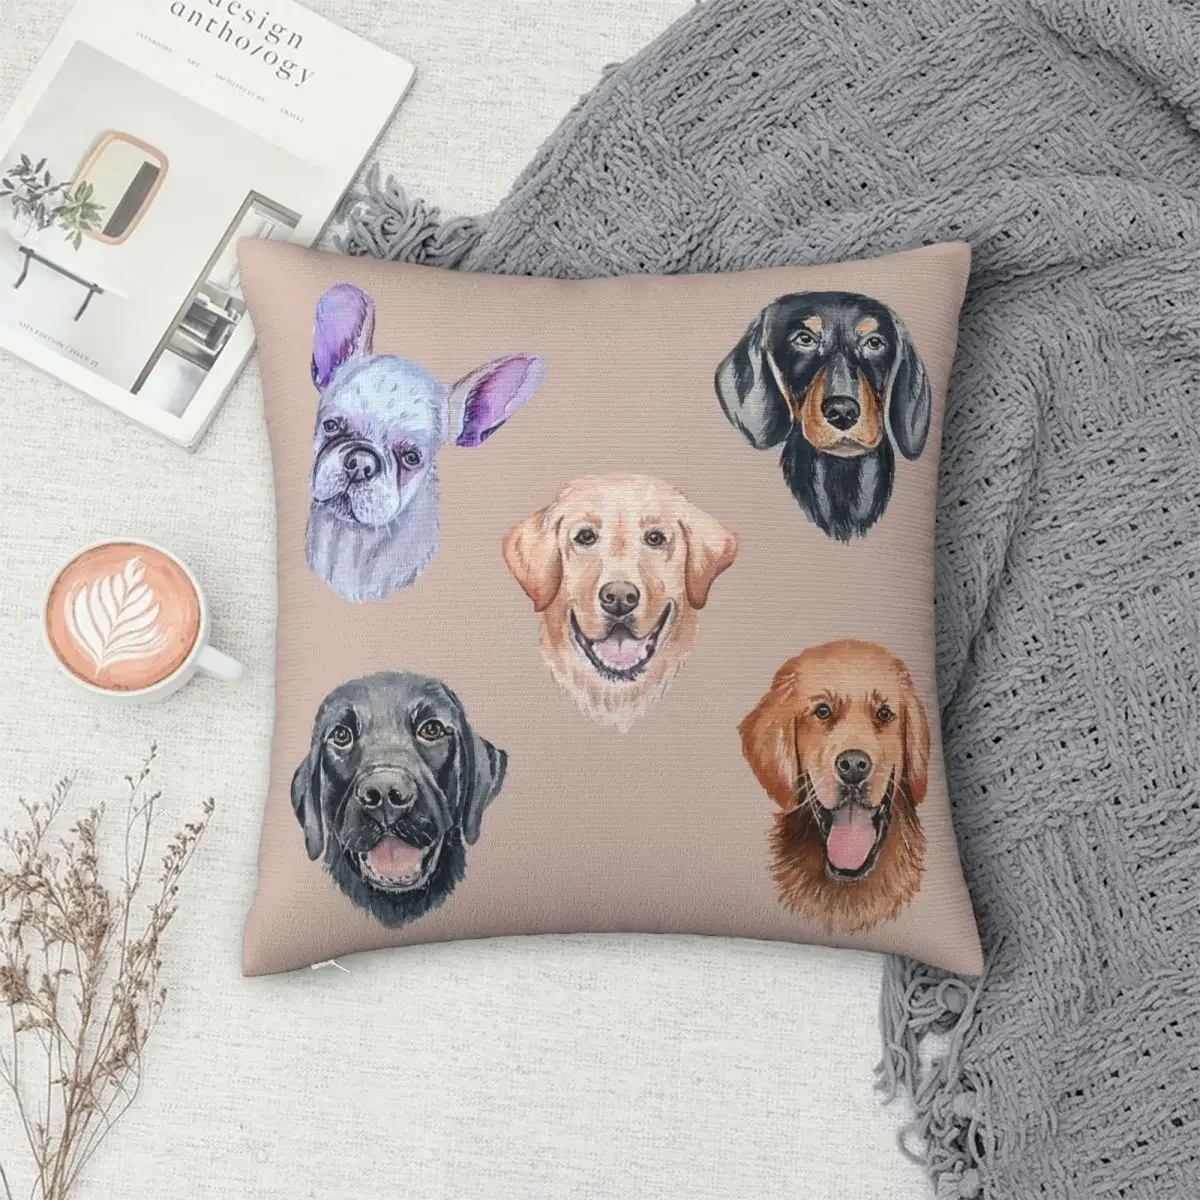 

Five Amazing Dogs Pillowcase Polyester Pillows Cover Cushion Comfort Throw Pillow Sofa Decorative Cushions Used for Home Bedroom